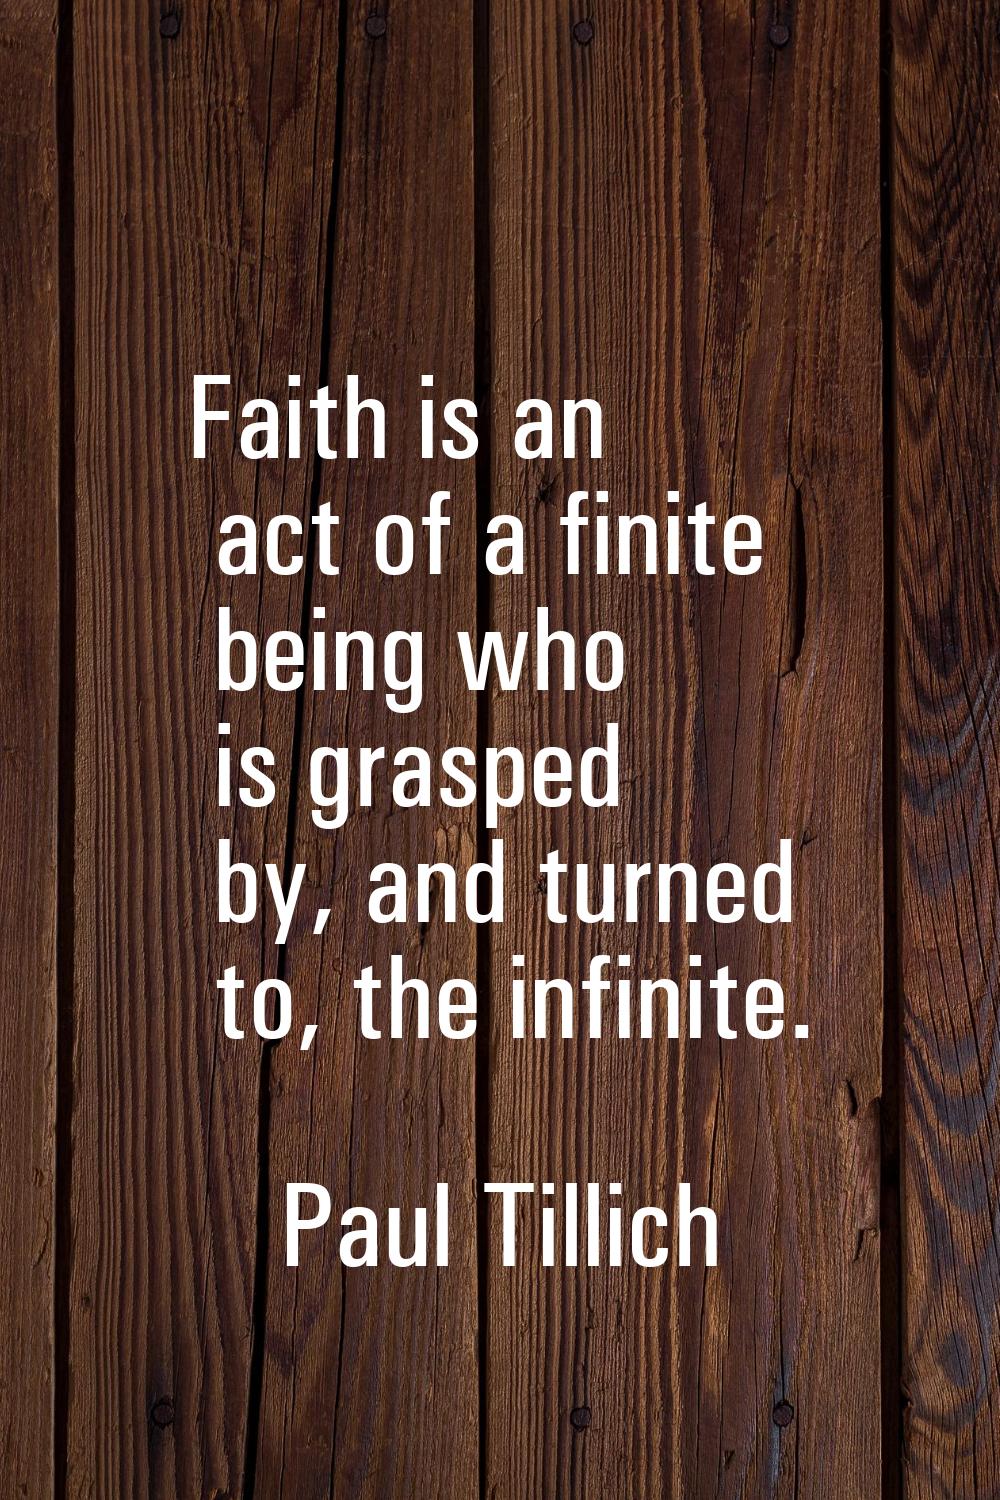 Faith is an act of a finite being who is grasped by, and turned to, the infinite.